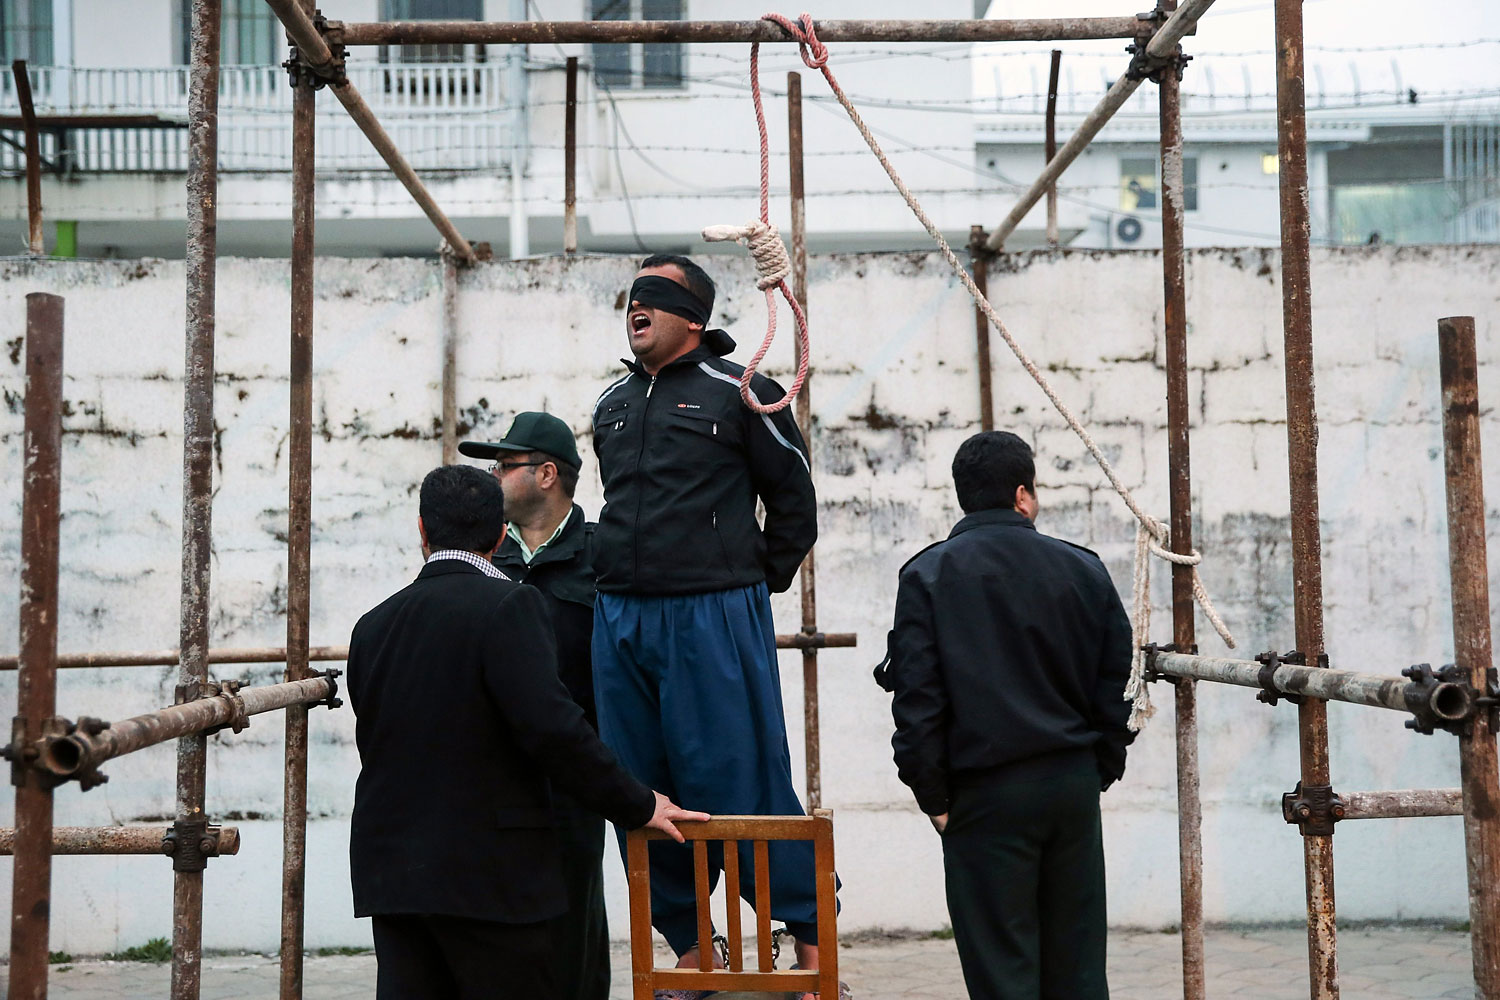 Balal reacts as he stands in the gallows during his execution ceremony in the northern city of Nowshahr on April 15, 2014.